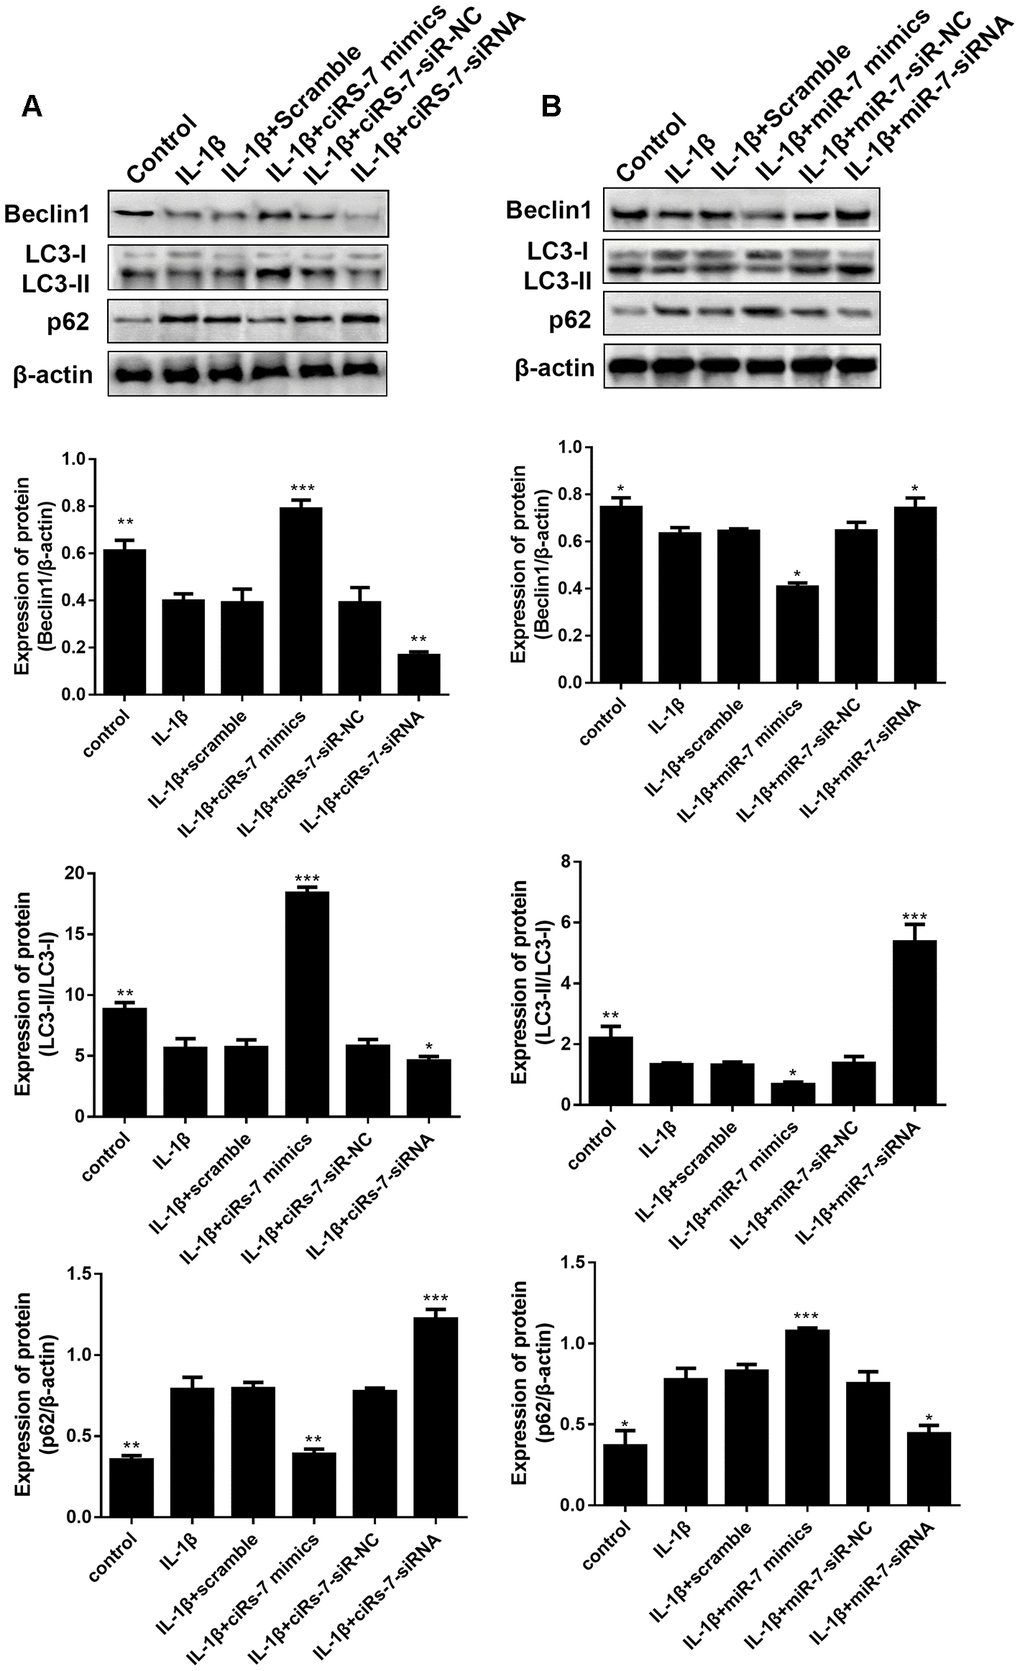 Effects of ciRS-7-related transfections (A) and miR-7-related transfections (B) on protein levels of autophagy-related Beclin1, LC3-II/I and p62. Data represent the mean ± SD (n=3), * p p p 